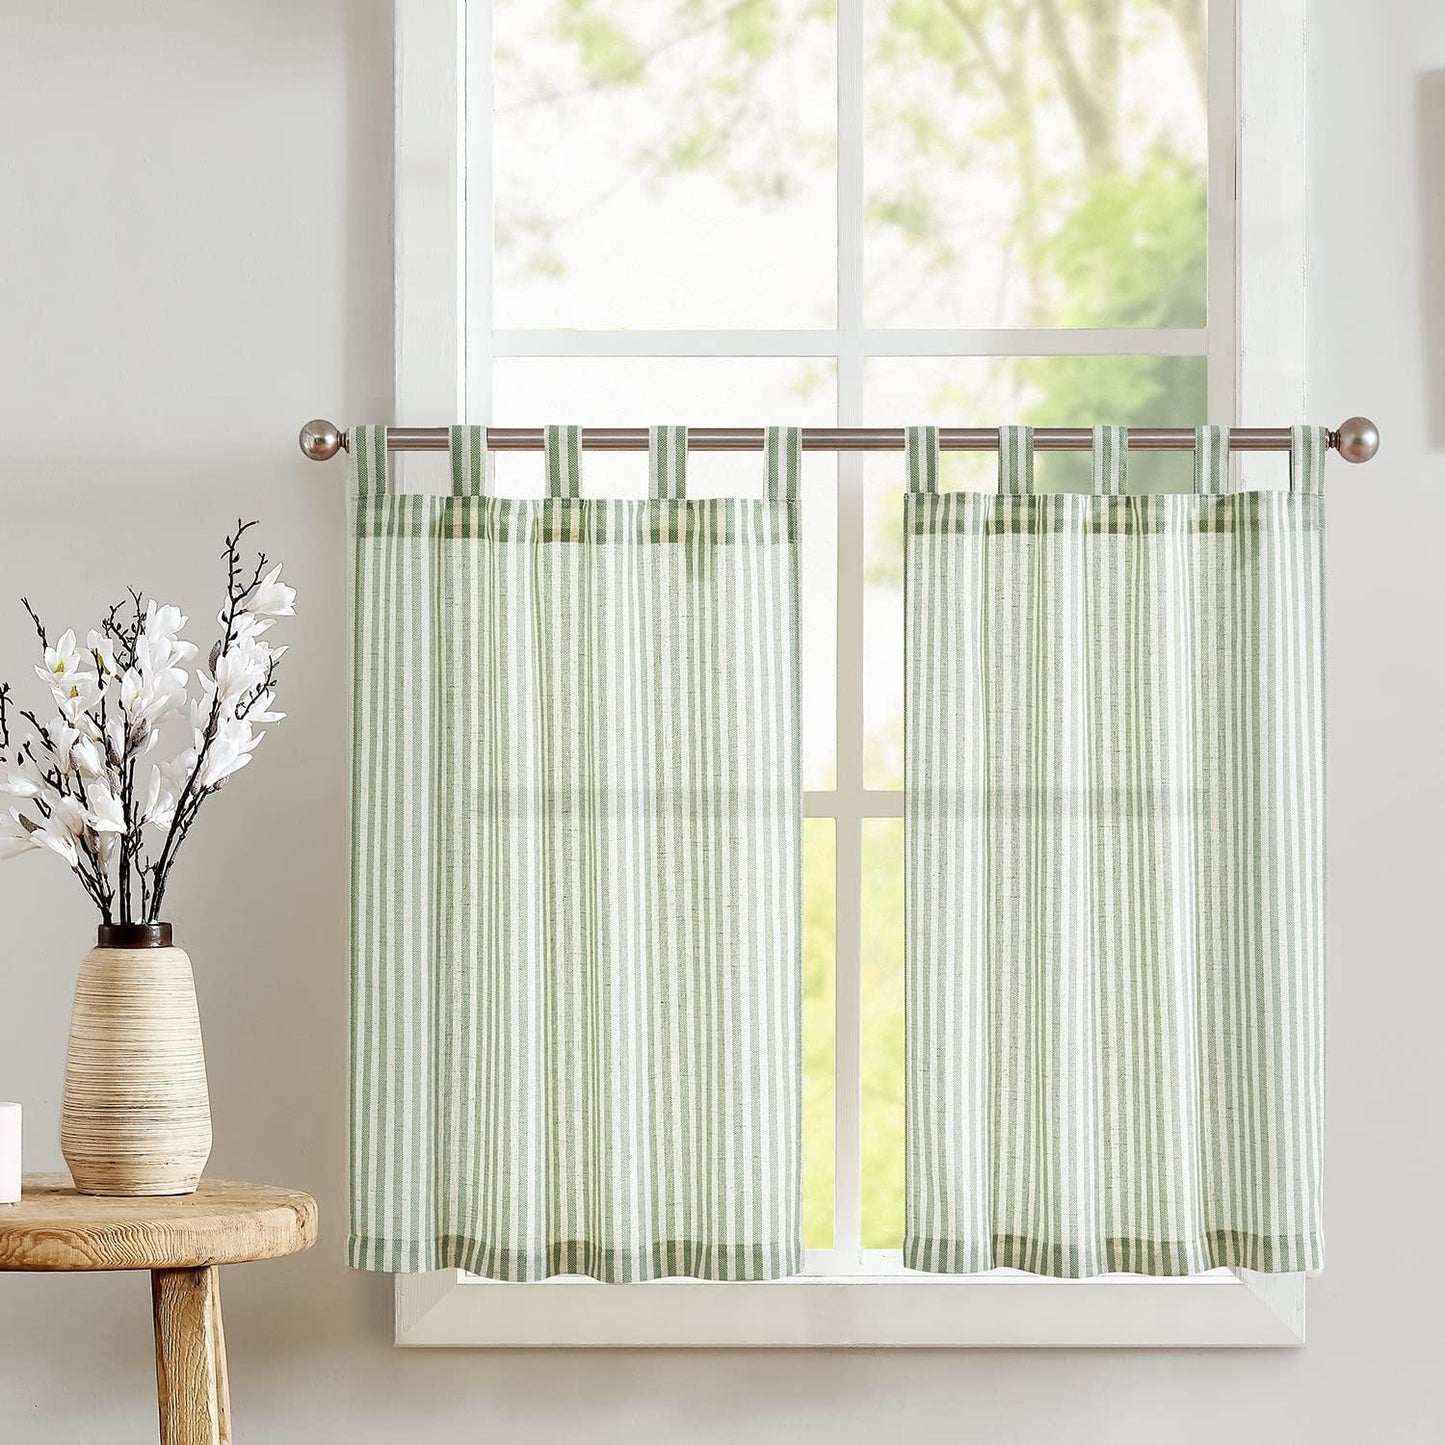 Jinchan Kitchen Curtains Striped Tier Curtains Ticking Stripe Linen Curtains Pinstripe Cafe Curtains 24 Inch Length for Living Room Bathroom Farmhouse Curtains Rod Pocket 2 Panels Black on Beige  CKNY HOME FASHION Tab Top Striped Sage Green W26 X L36 